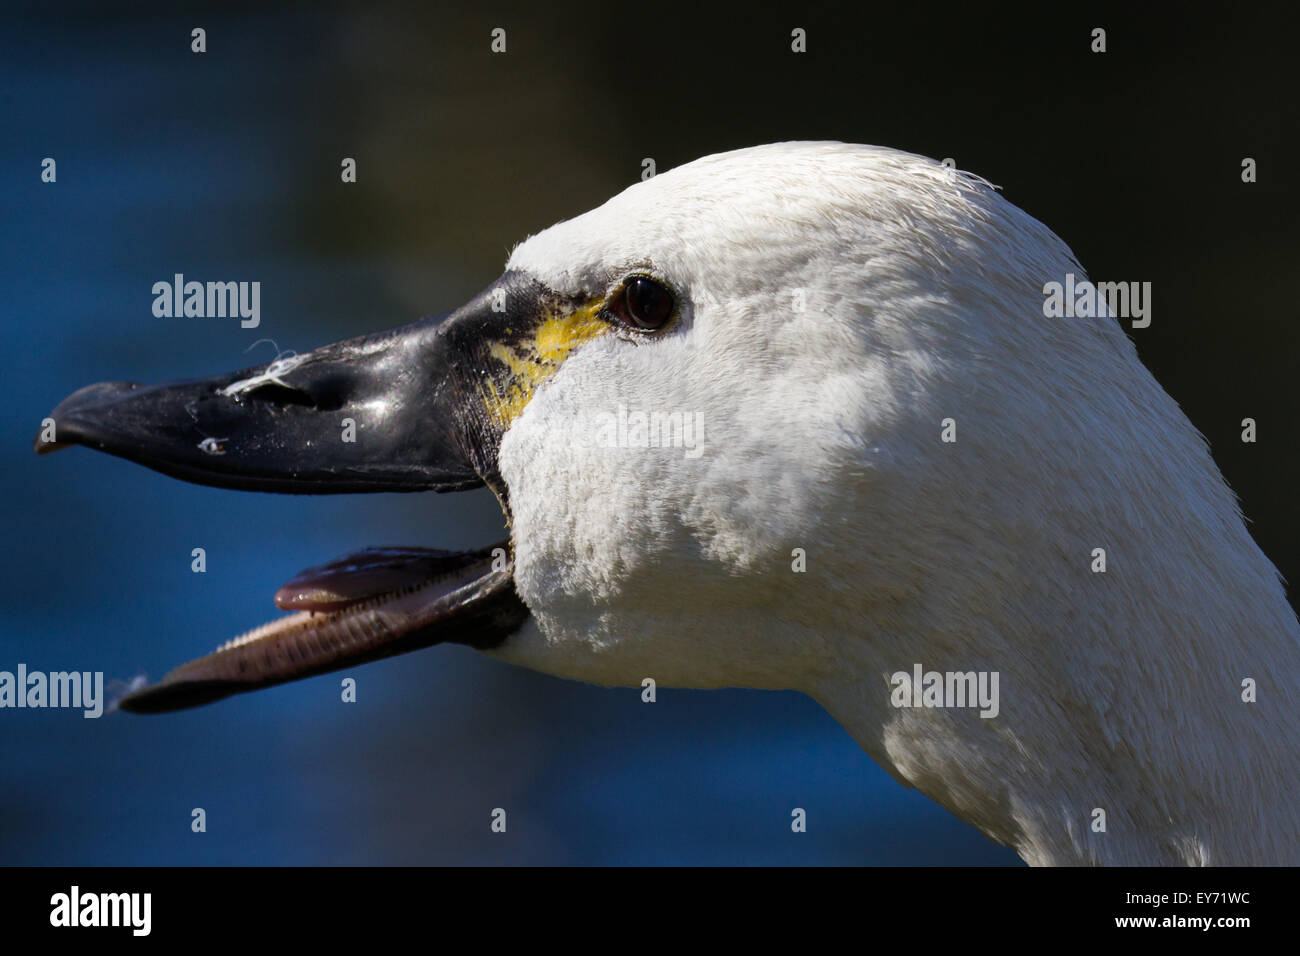 Detailed close up photograph of a duck bill and head Stock Photo